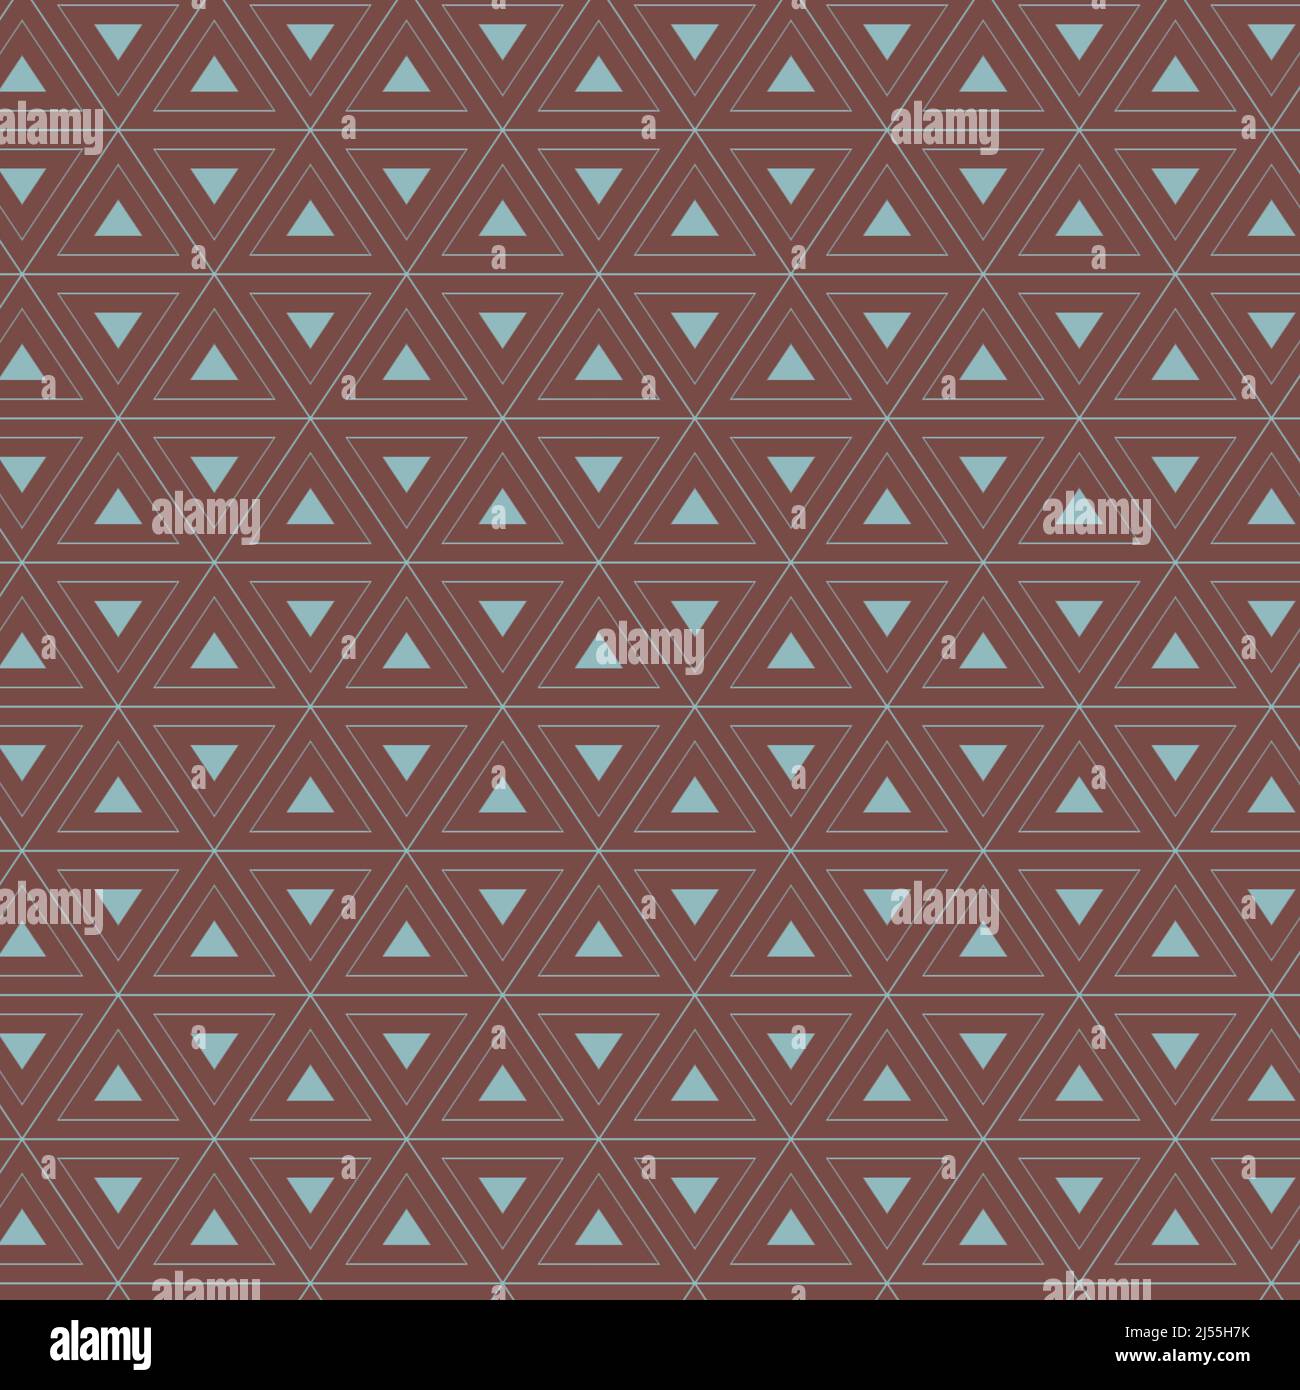 Triangular pattern background copper red and muted teal for design elements in modern colors. Stock Photo